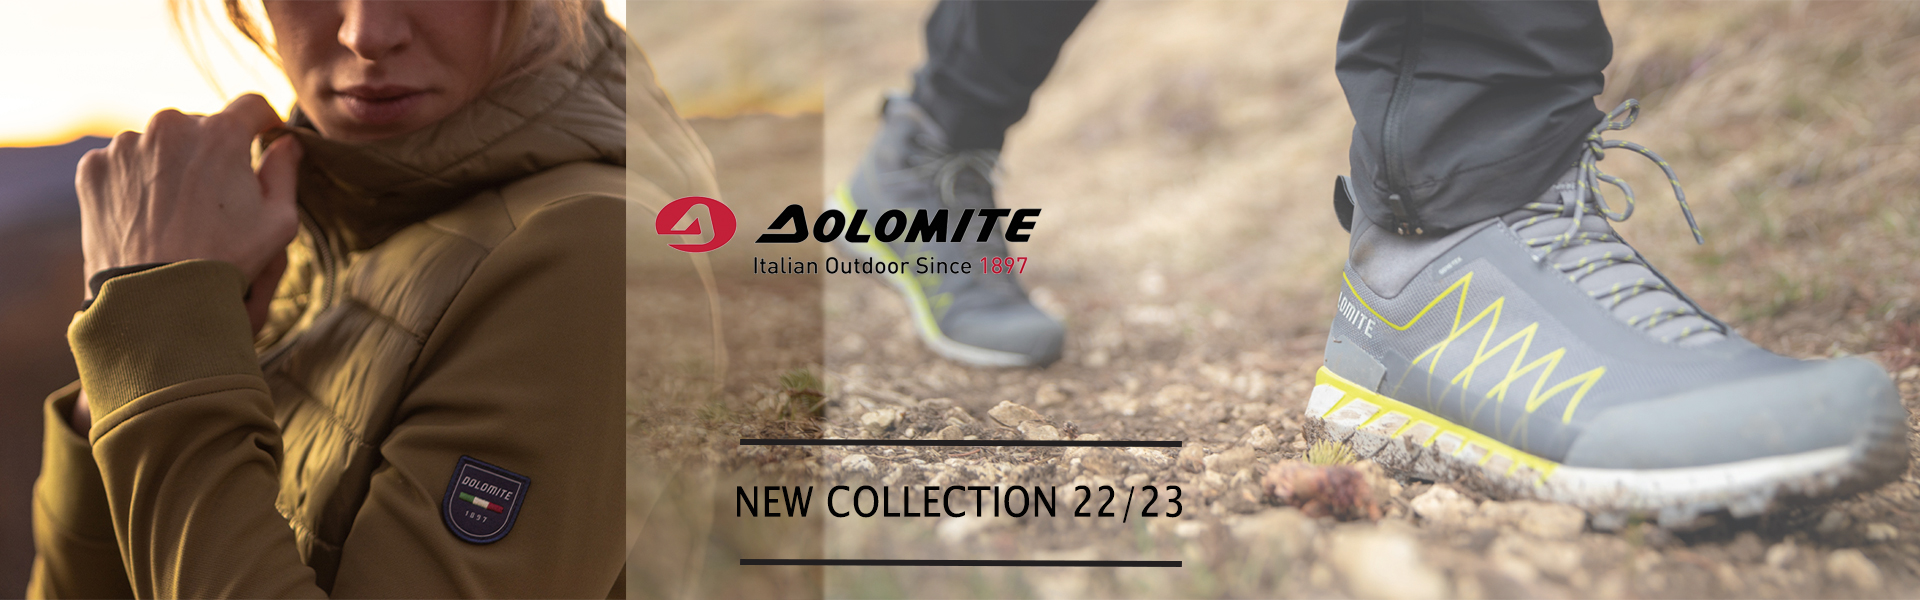 Dolomite new collection